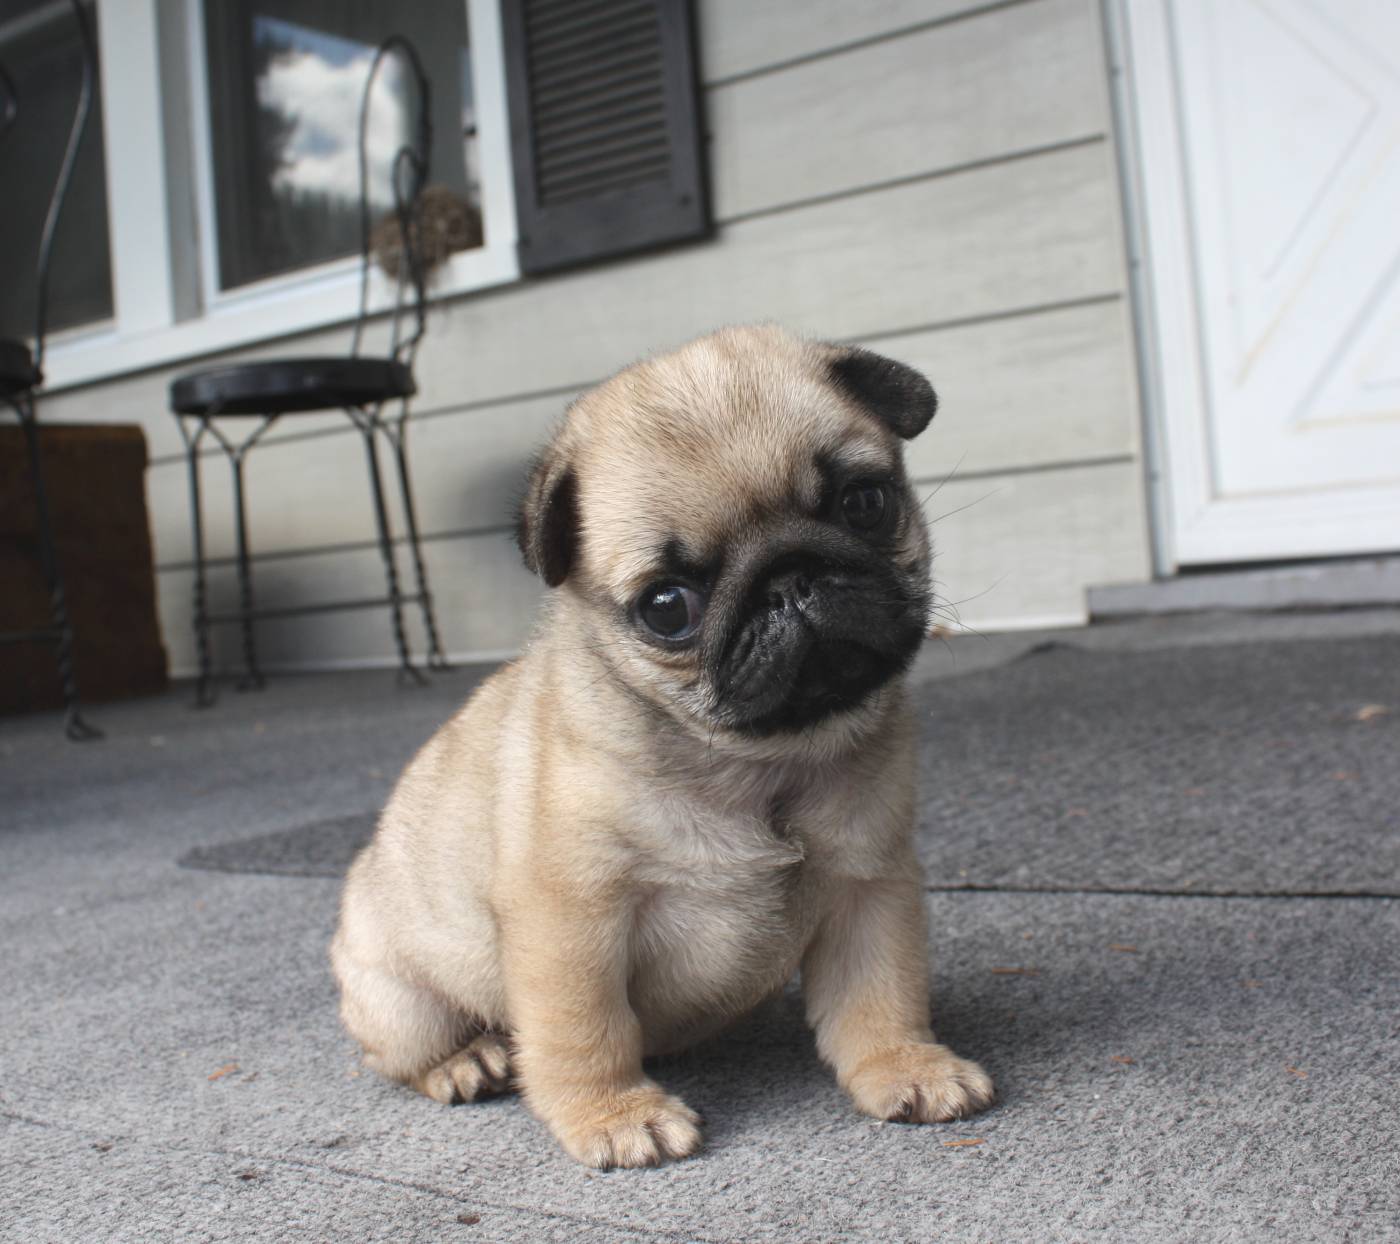 Worlds Cutest Pug - Photos All Recommendation